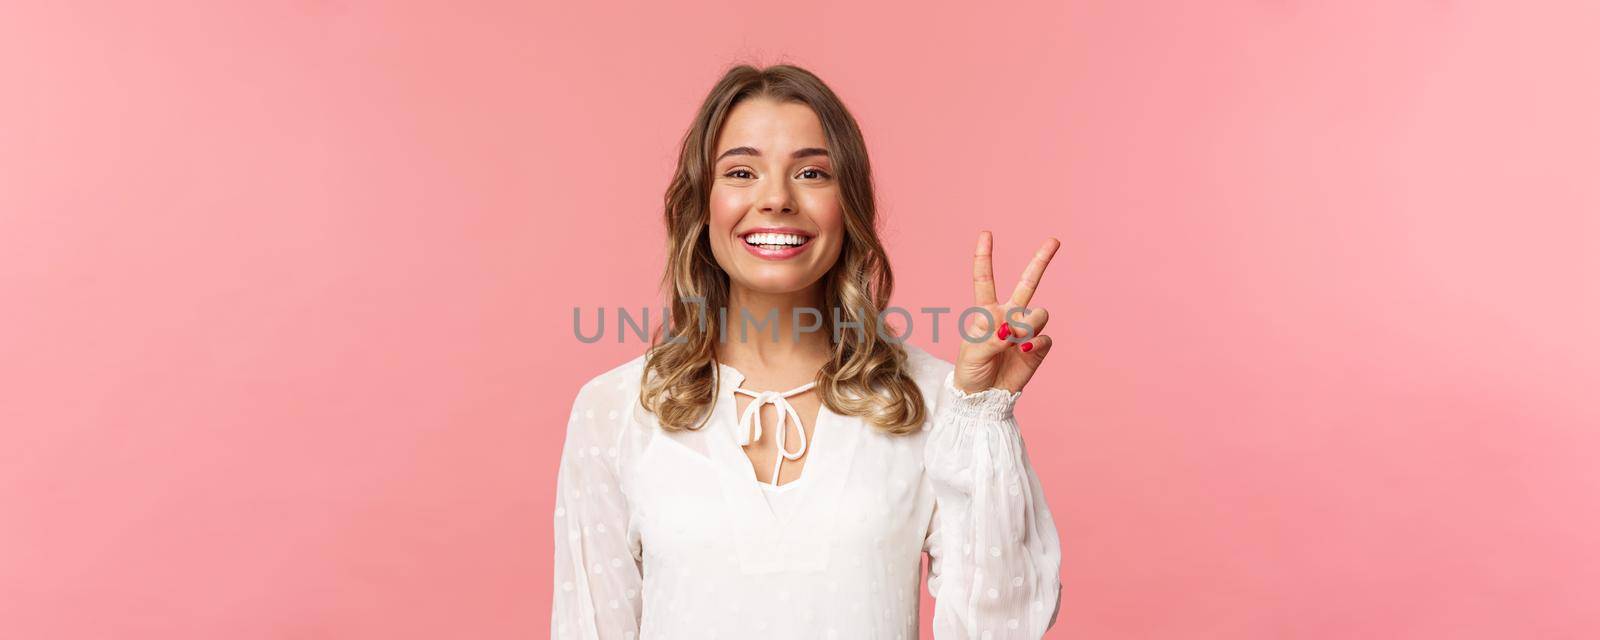 Close-up portrait of romantic lovely smiling girl with blond short hair, wearing white dress, show peace sign enjoying spring, grinning and look camera over pink background. Copy space